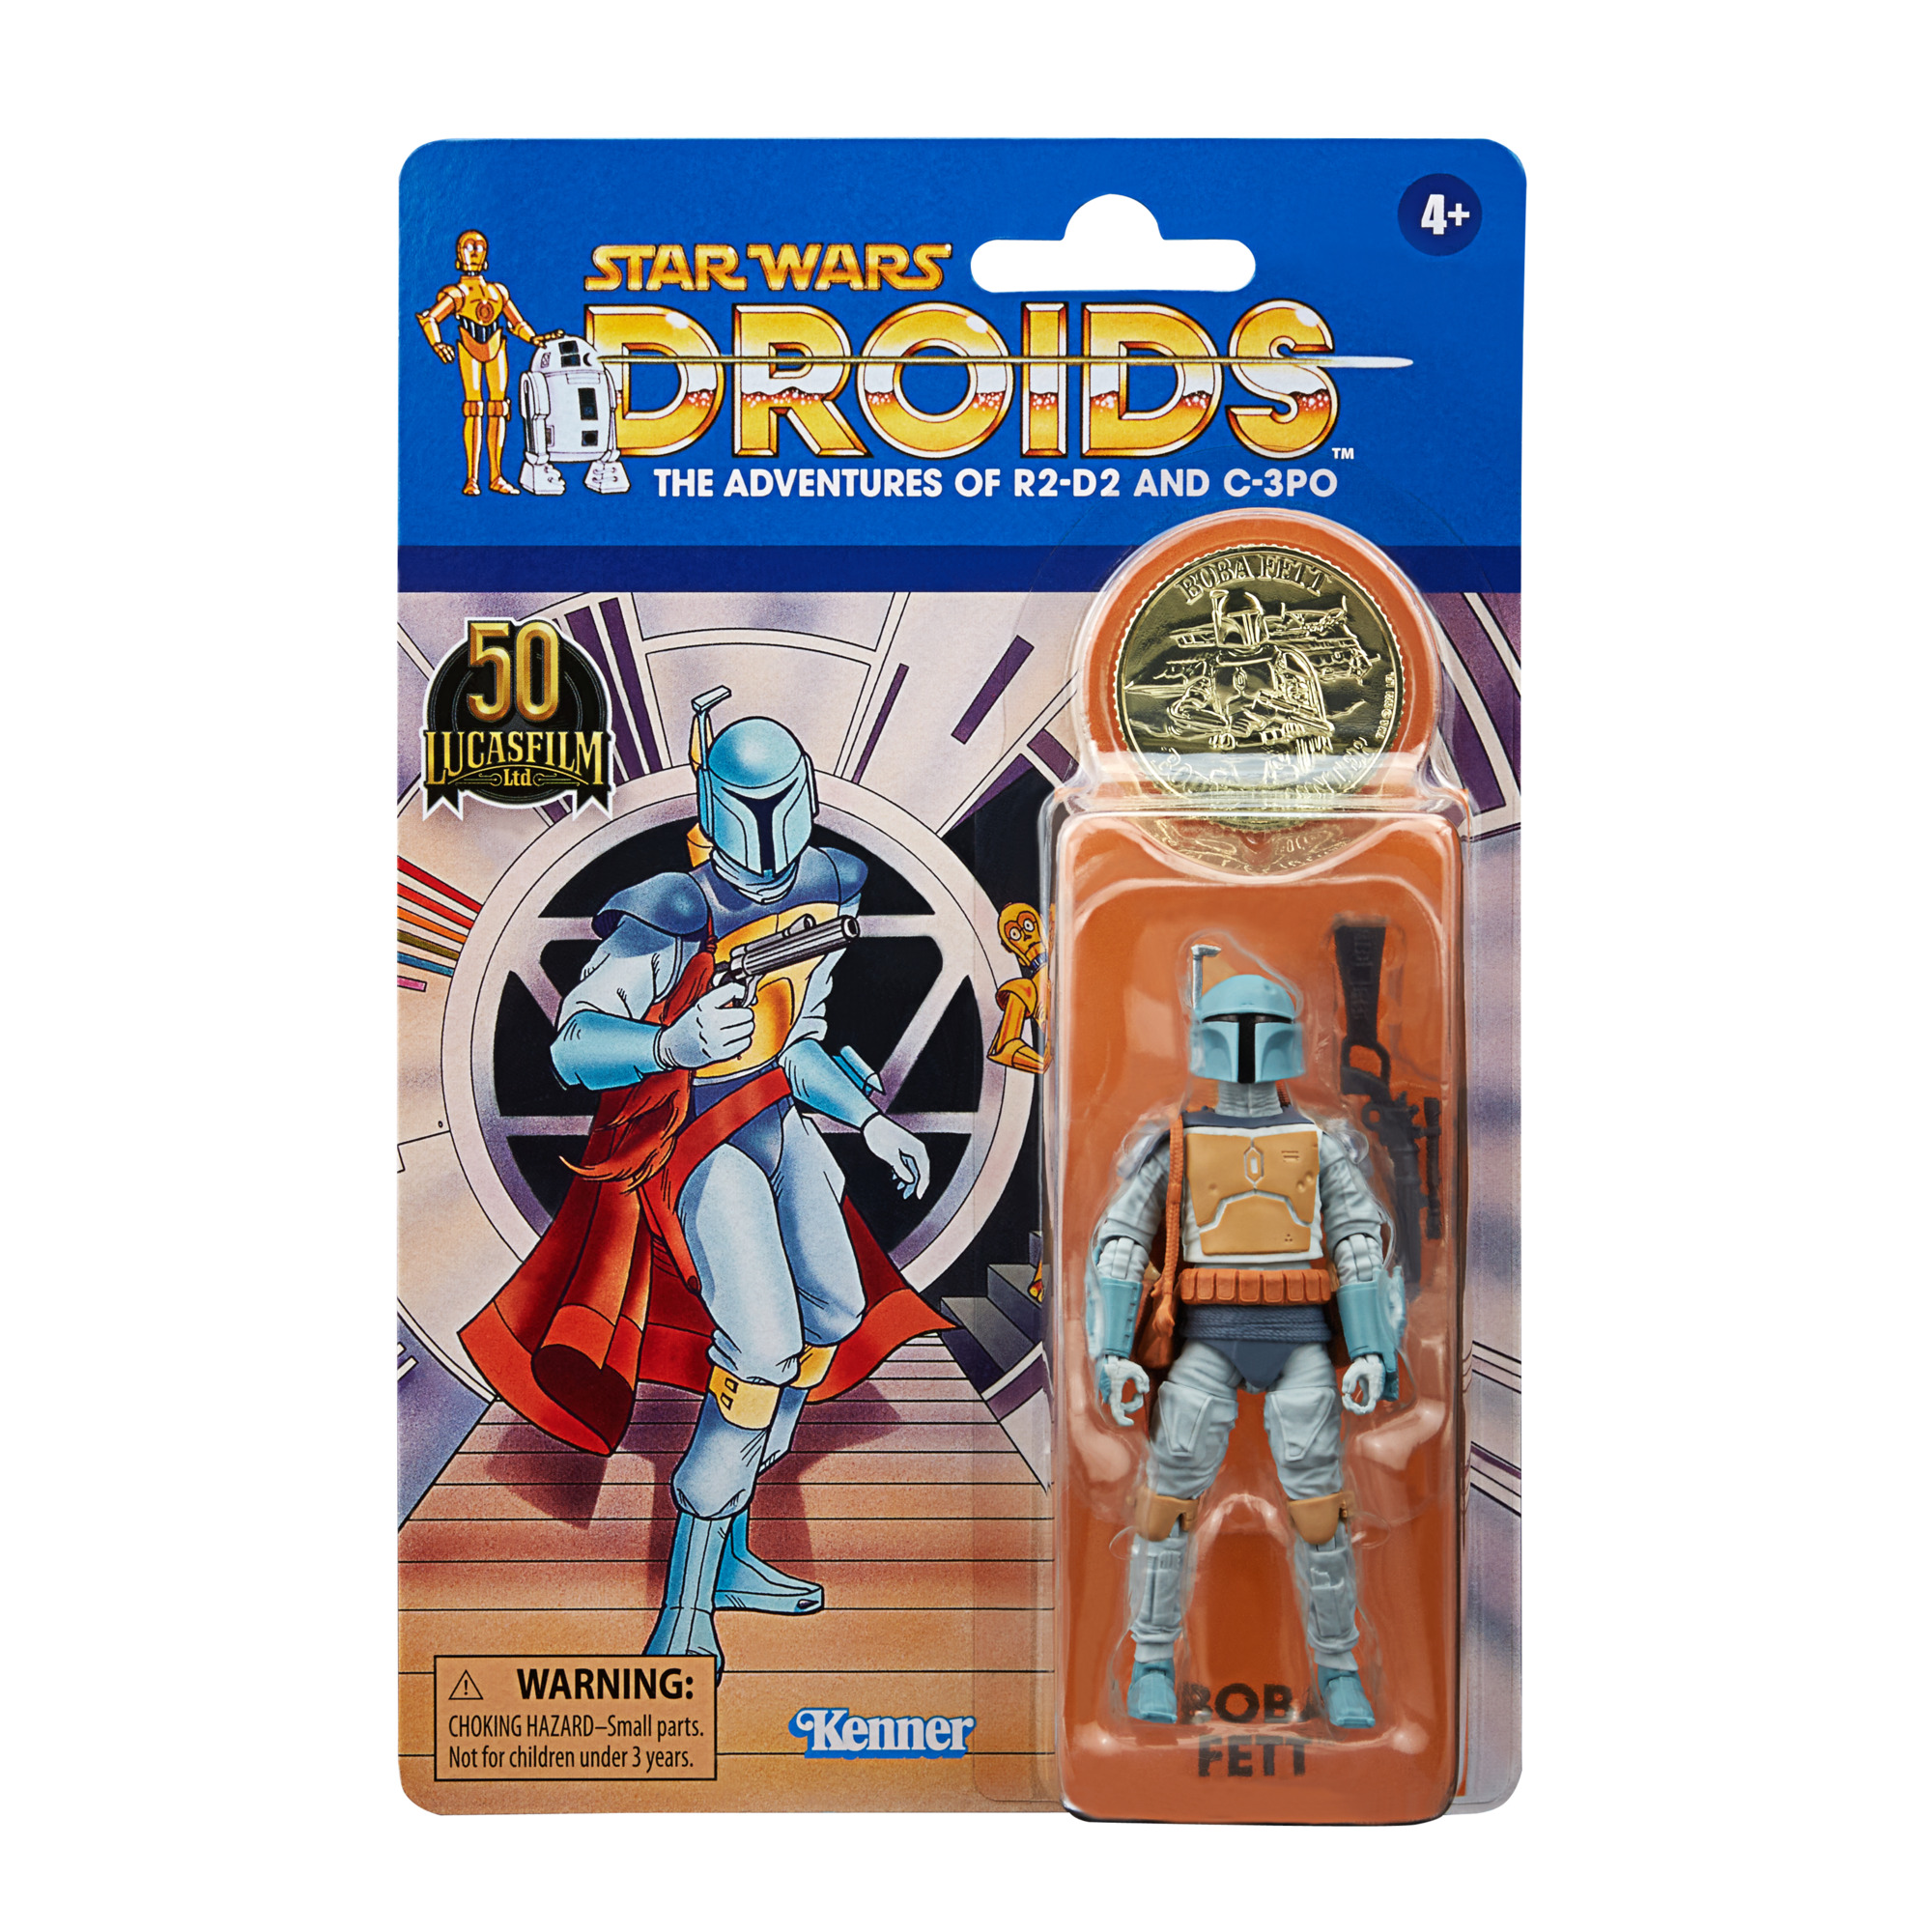 Star Wars: Droids Press Release & Images